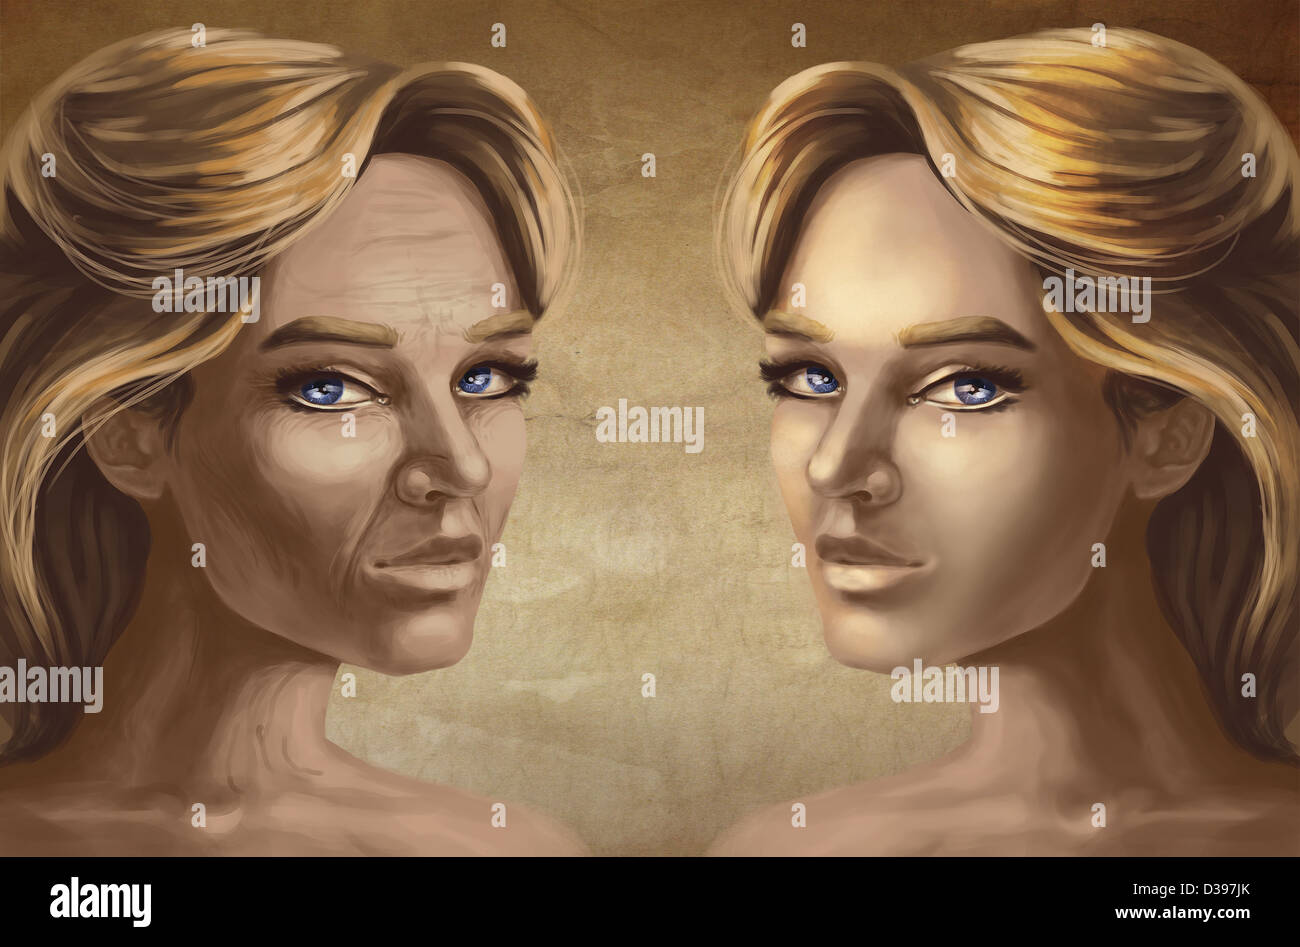 Differential female faces depicting after effects cosmetic surgery Stock Photo